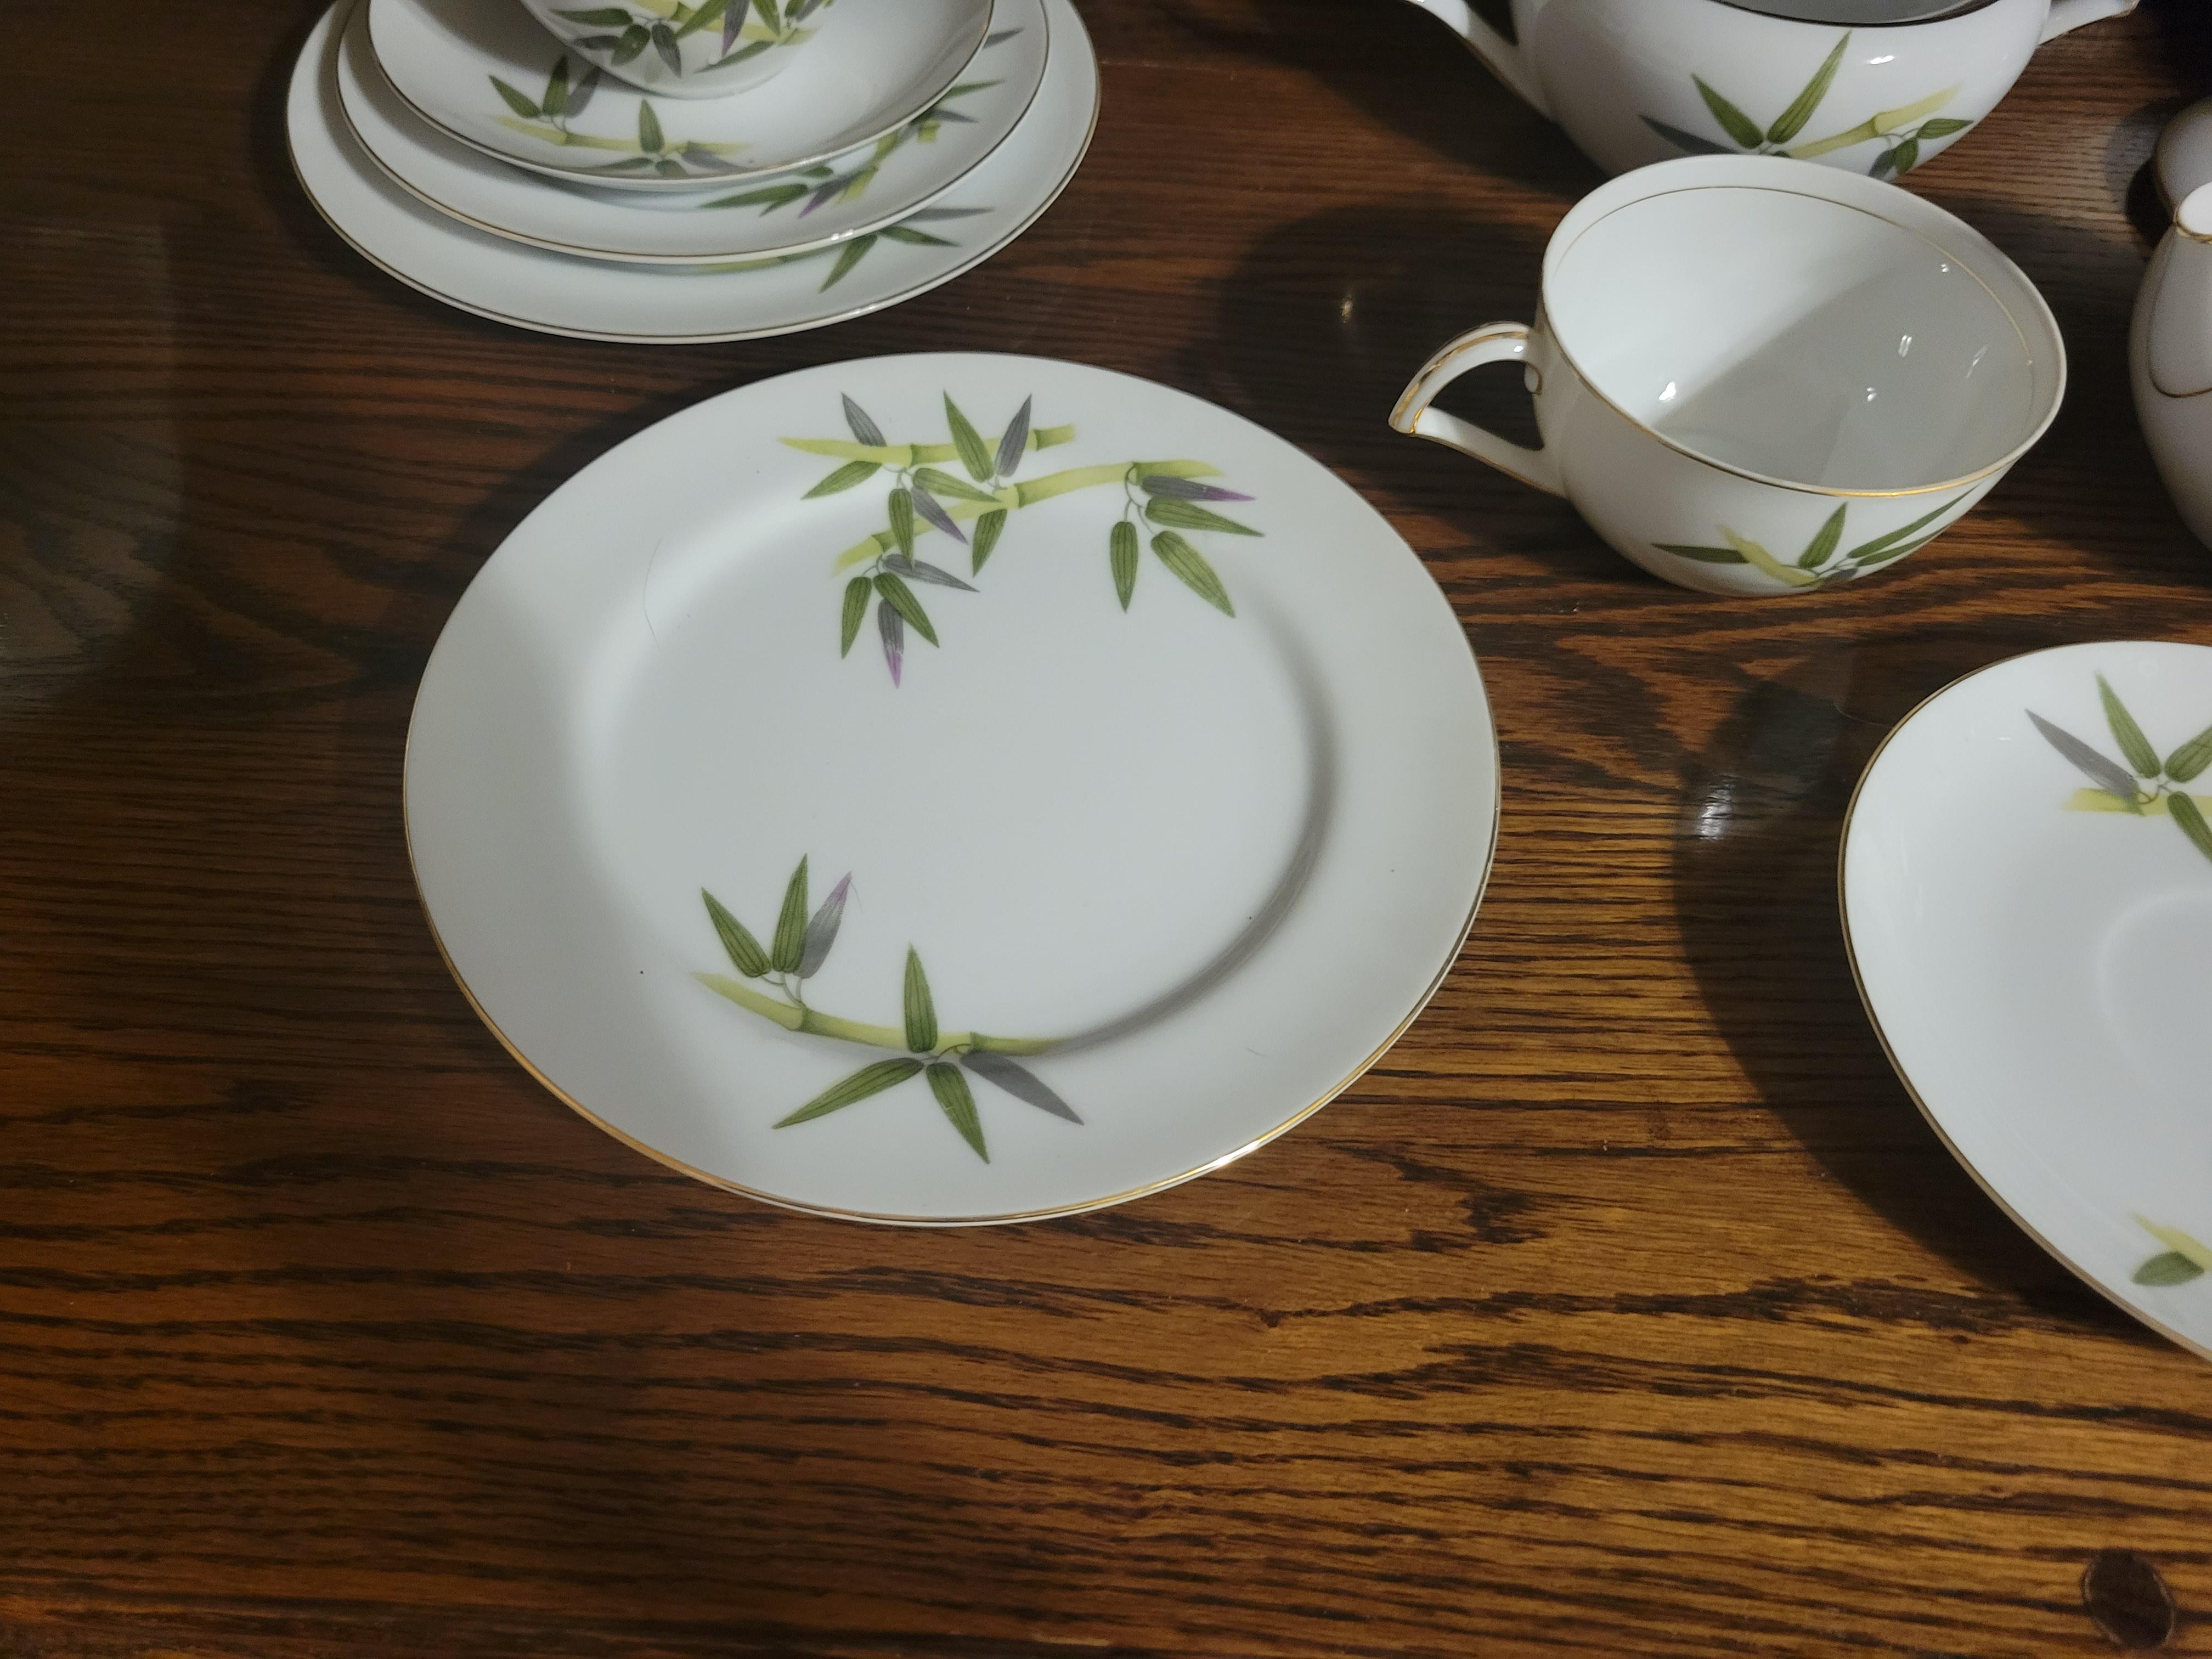 1951 Narumi Japan 'Spring Bamboo' Fine China Set - 24 pieces plus replacements  For Sale 5